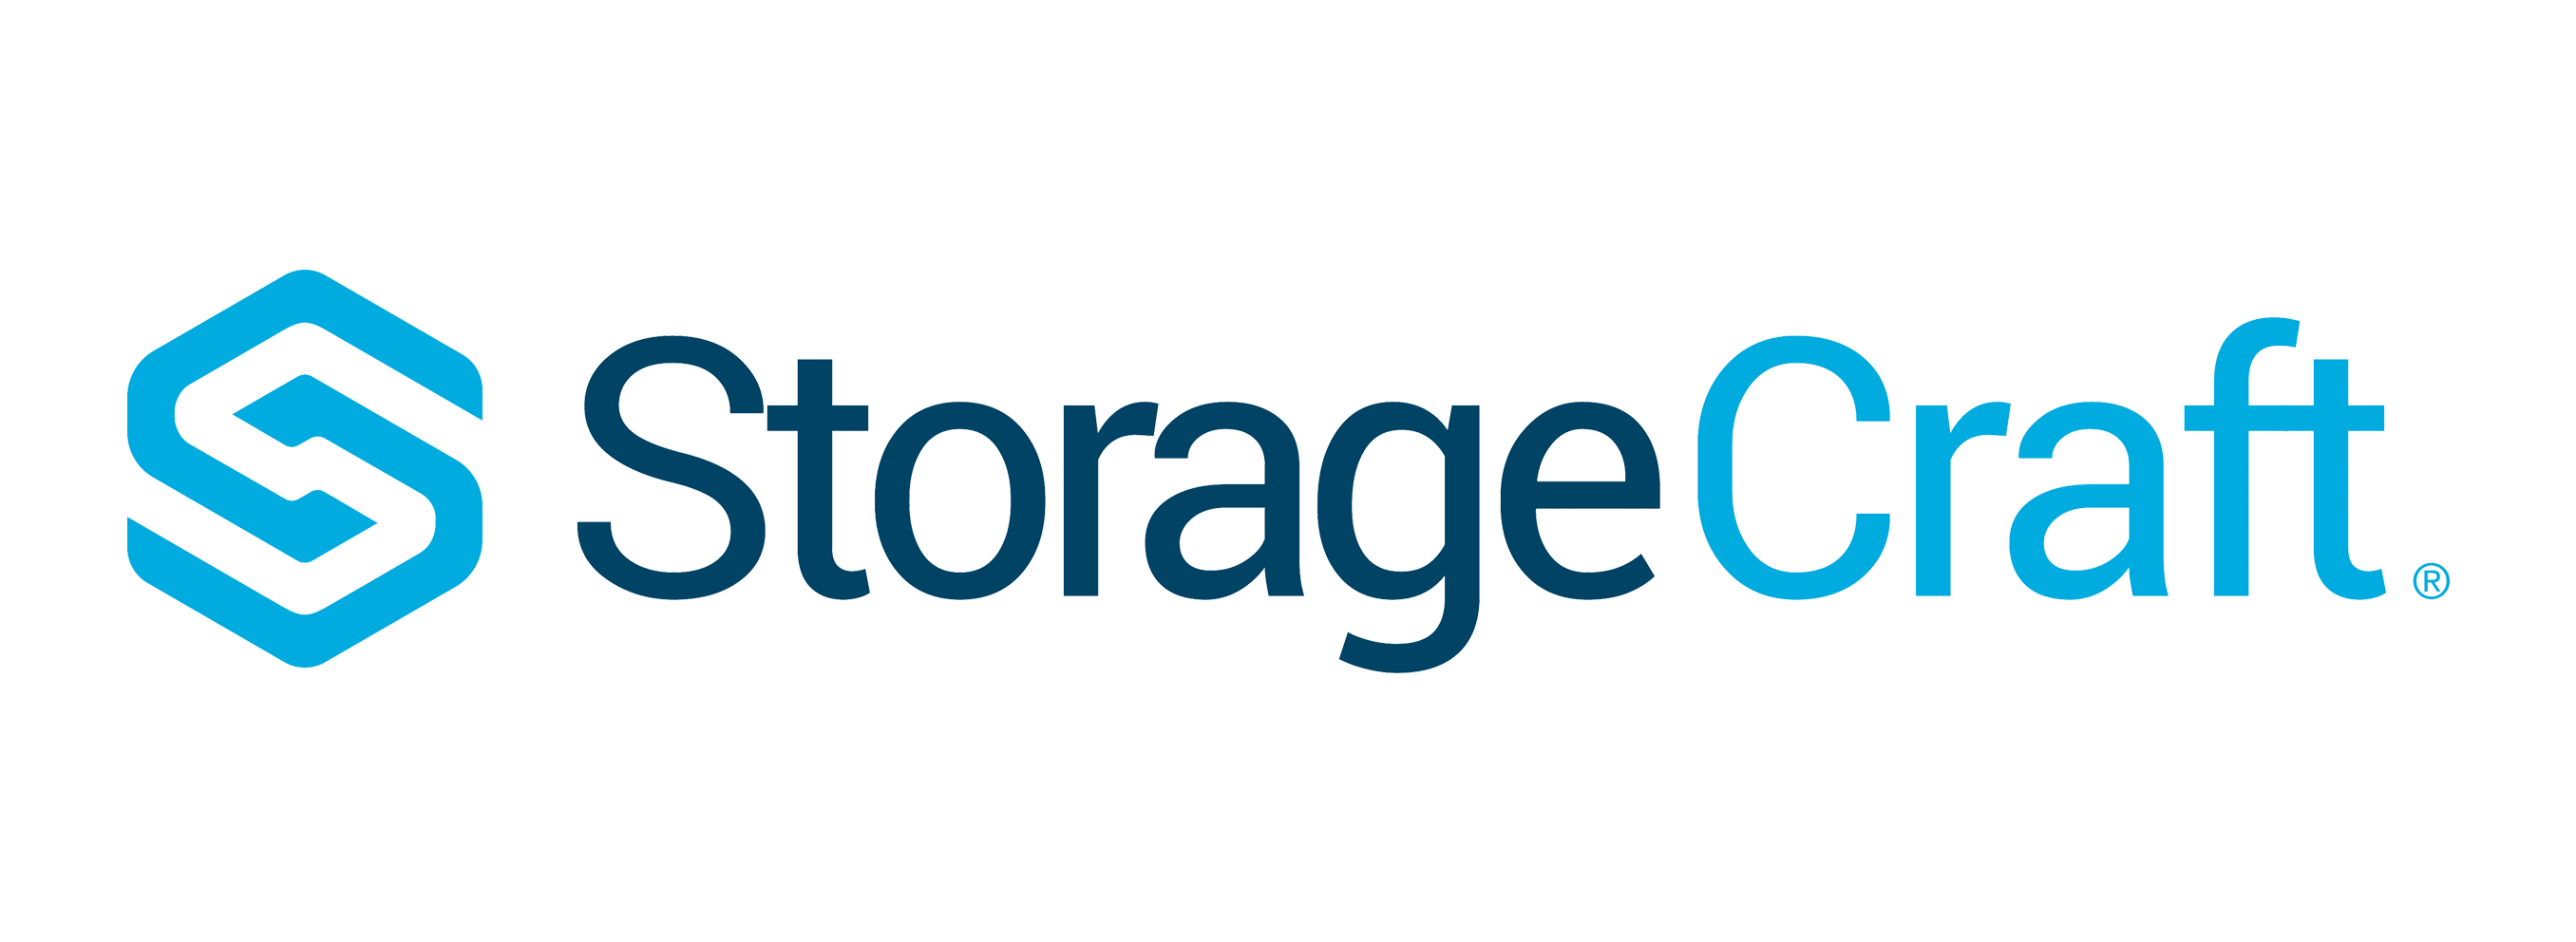 StorageCraft protection software licensing